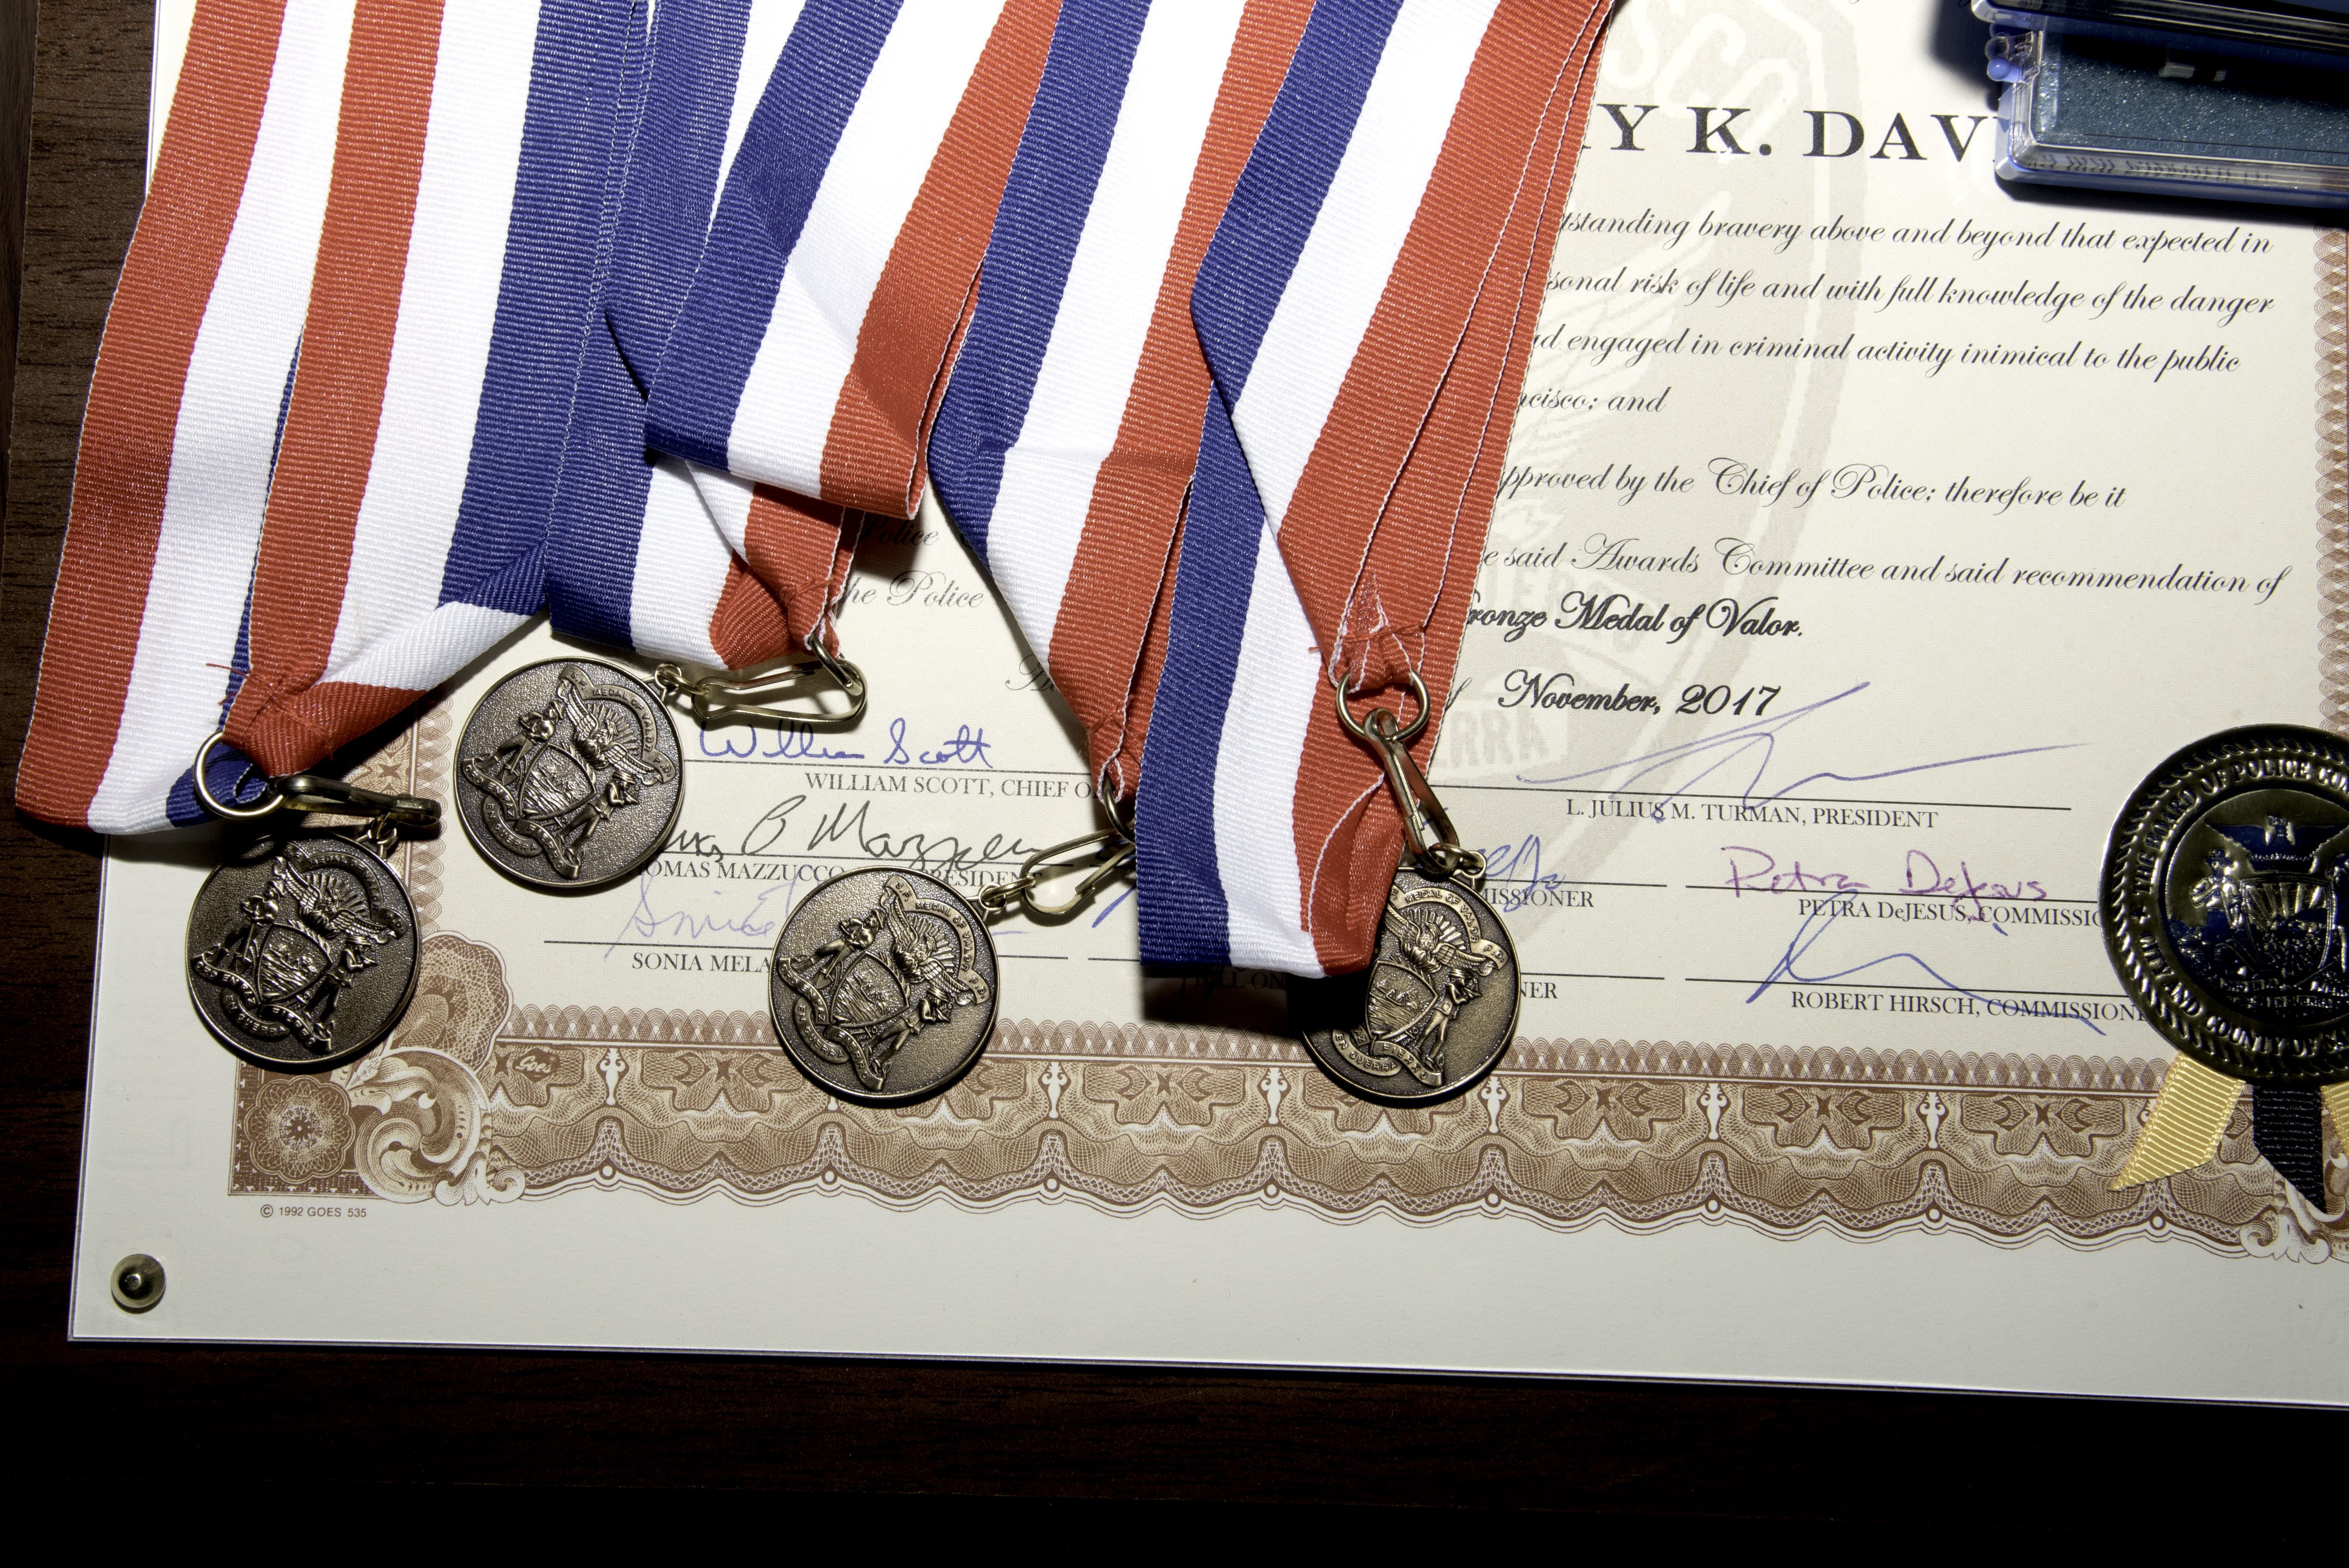 Photo of the certificate and medals